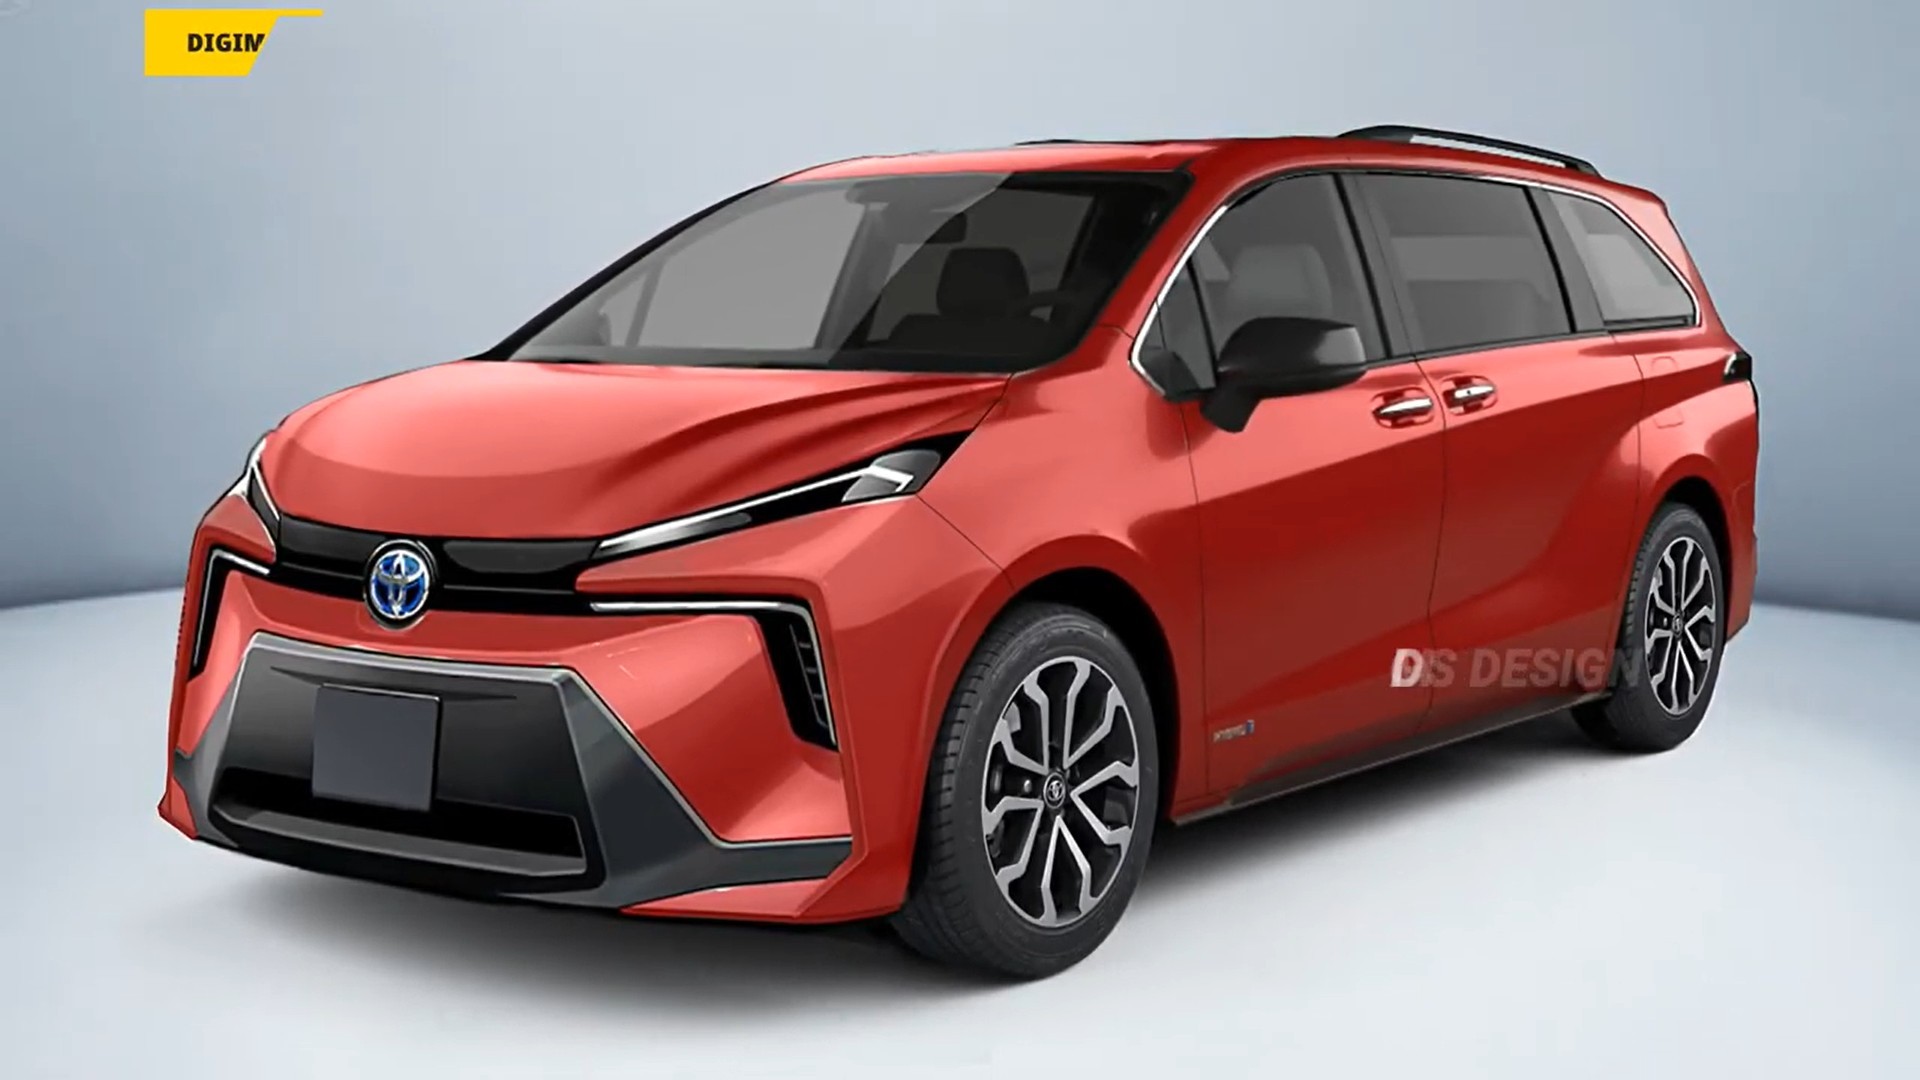 AllNew Toyota Sienna Gets CGI Reveal With Prius and Mazda Influences